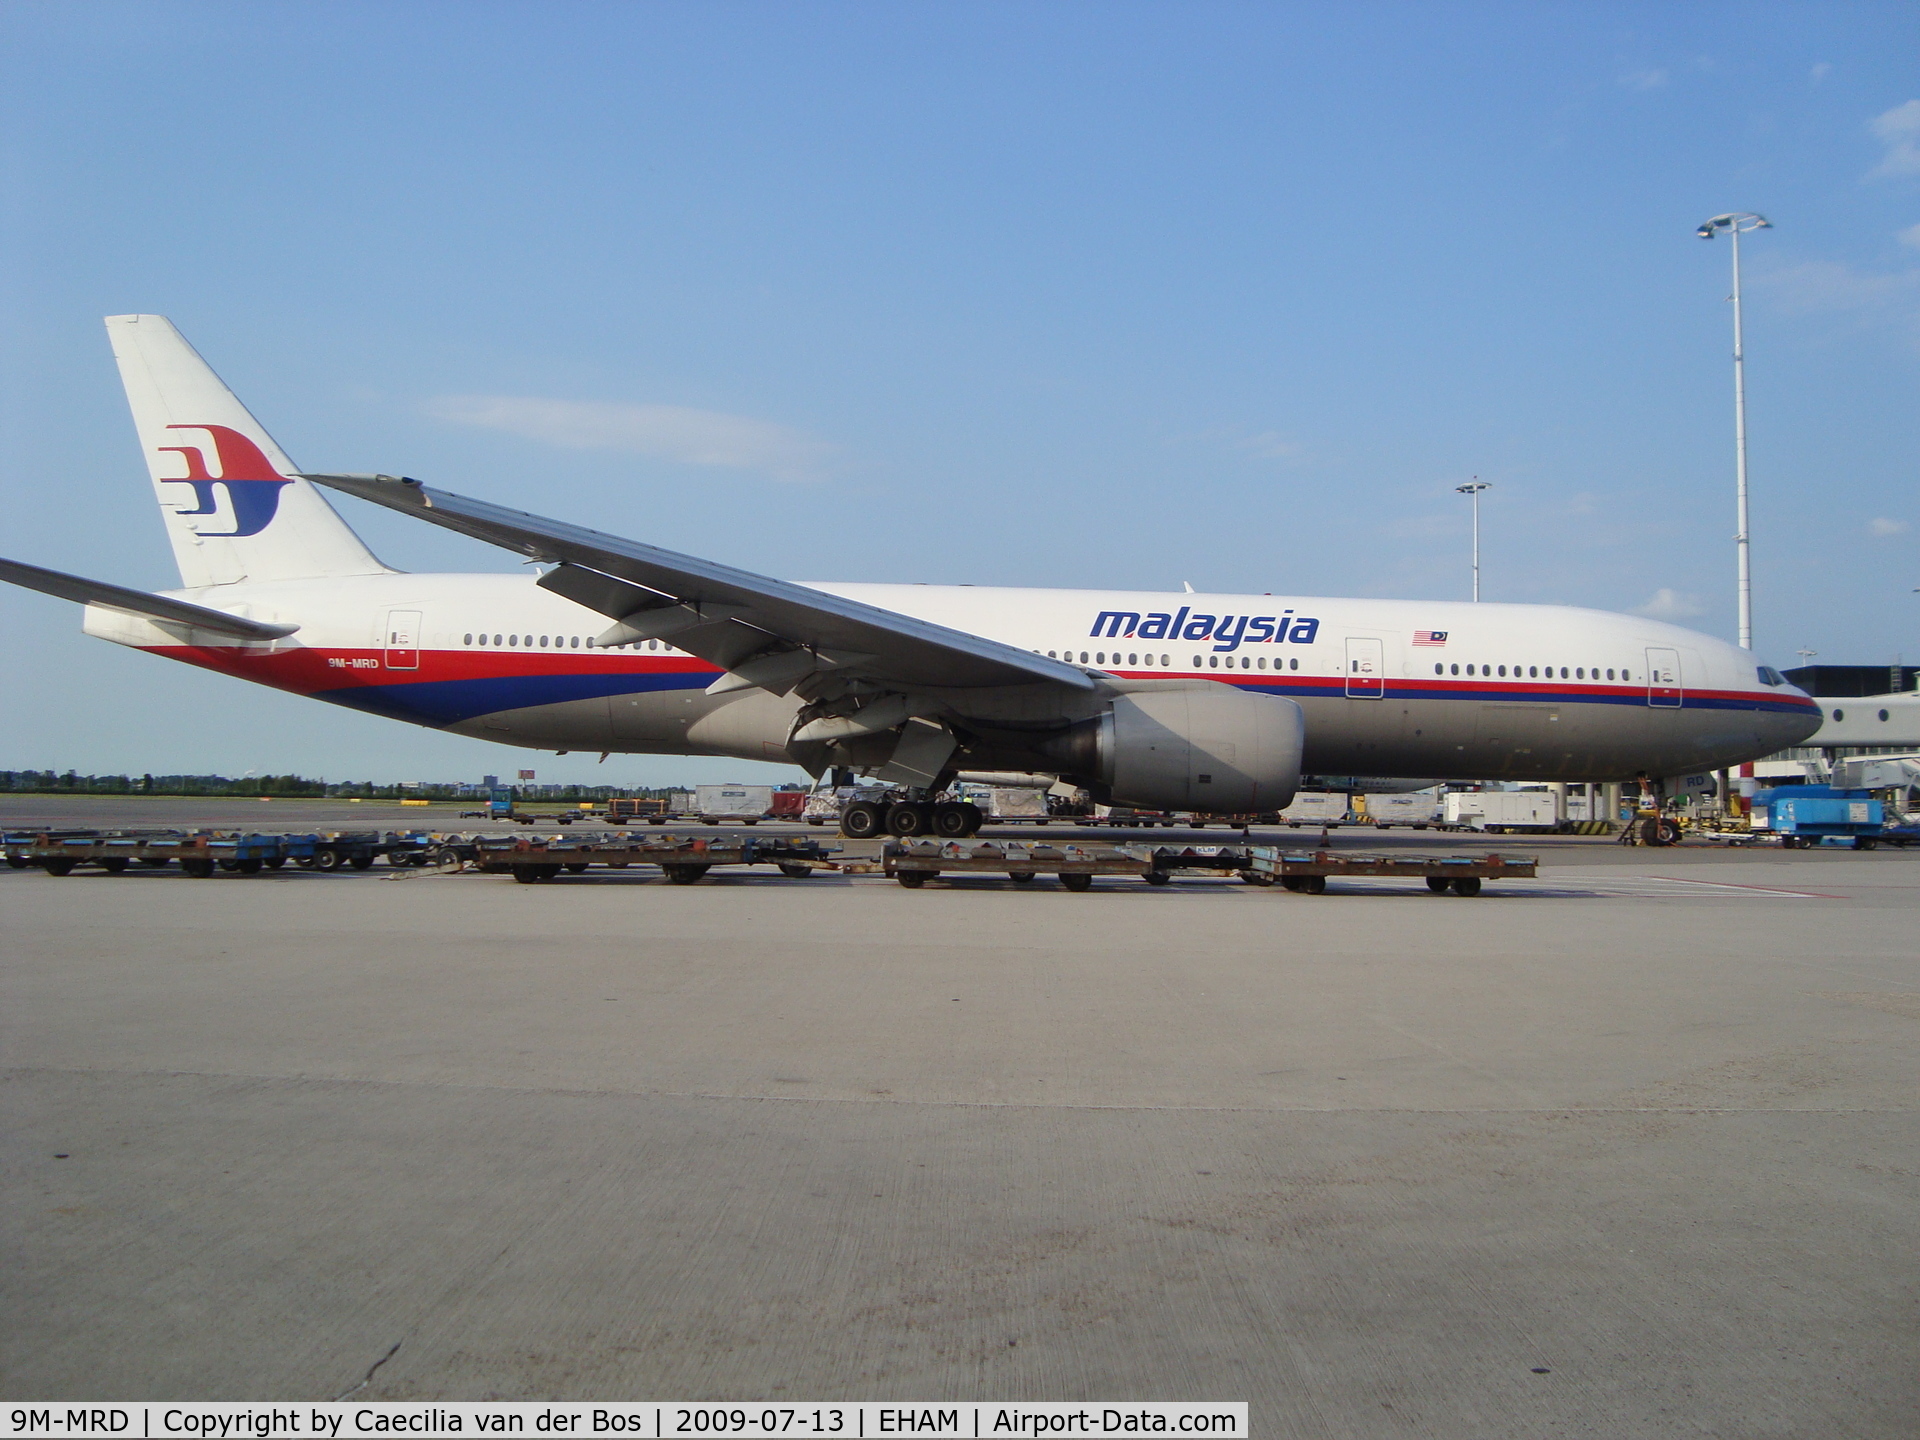 9M-MRD, 1997 Boeing 777-2H6/ER C/N 28411, Malaysia Airlines